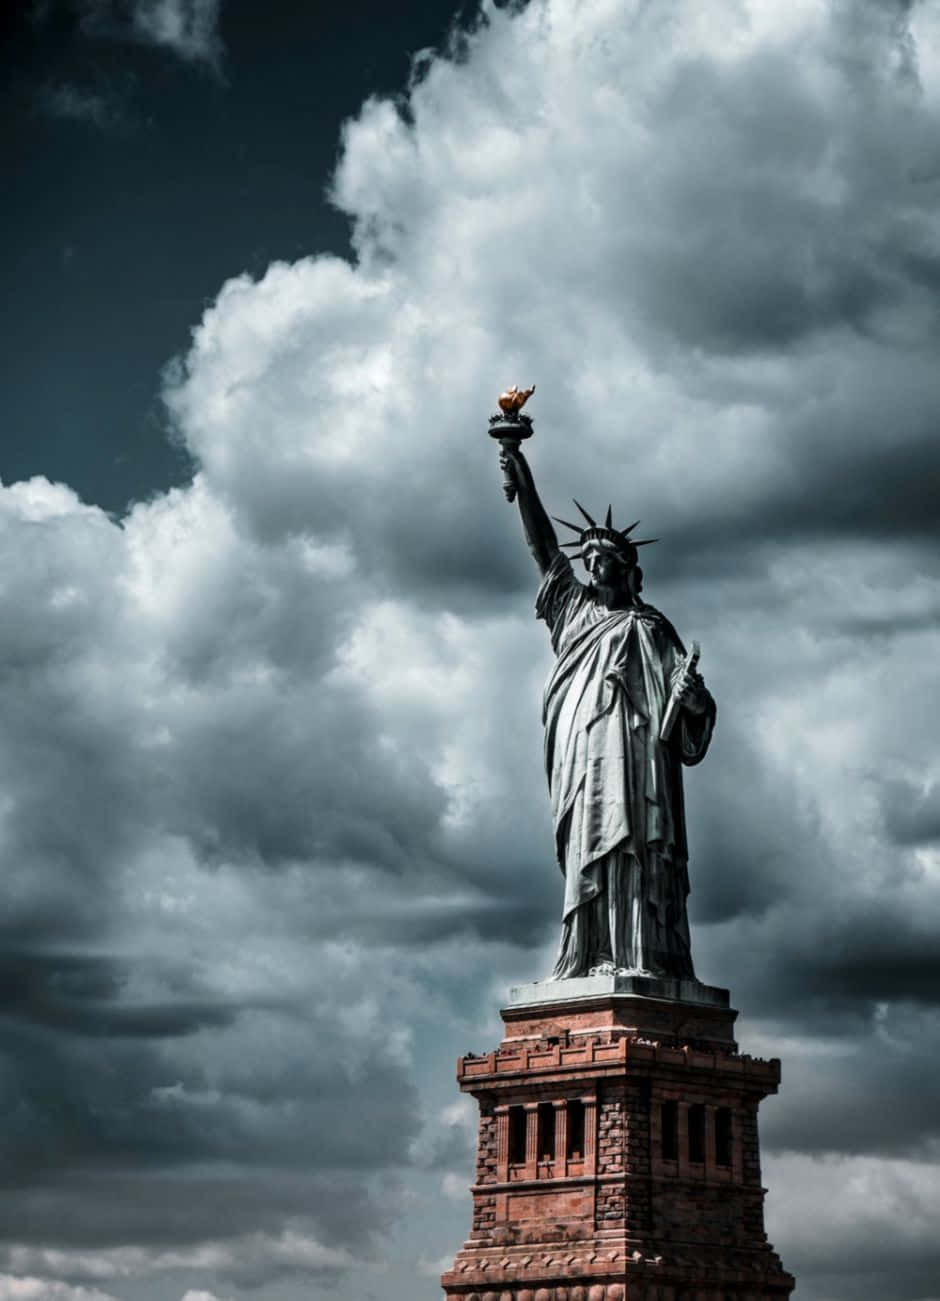 The Iconic Statue of Liberty stands tall in New York City